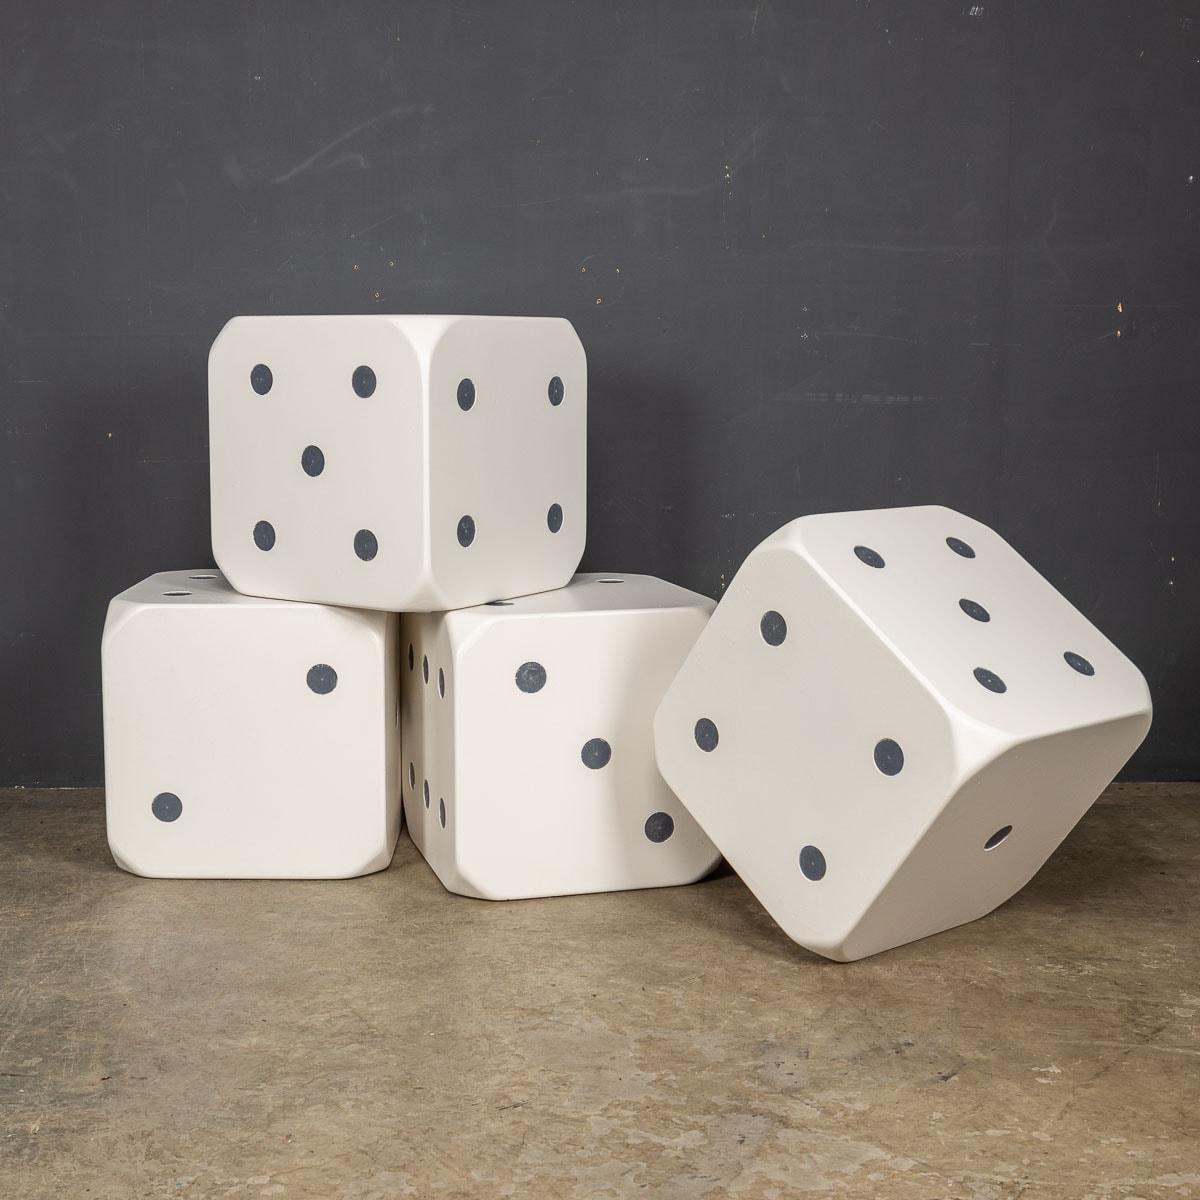 A playful collection of four wooden dice stools or side tables, designed in a delightful white hue adorned with charming grey spots. A wonderful addition to a games room.

CONDITION
In Good Condition - Wear consistent with age

SIZE
Height: